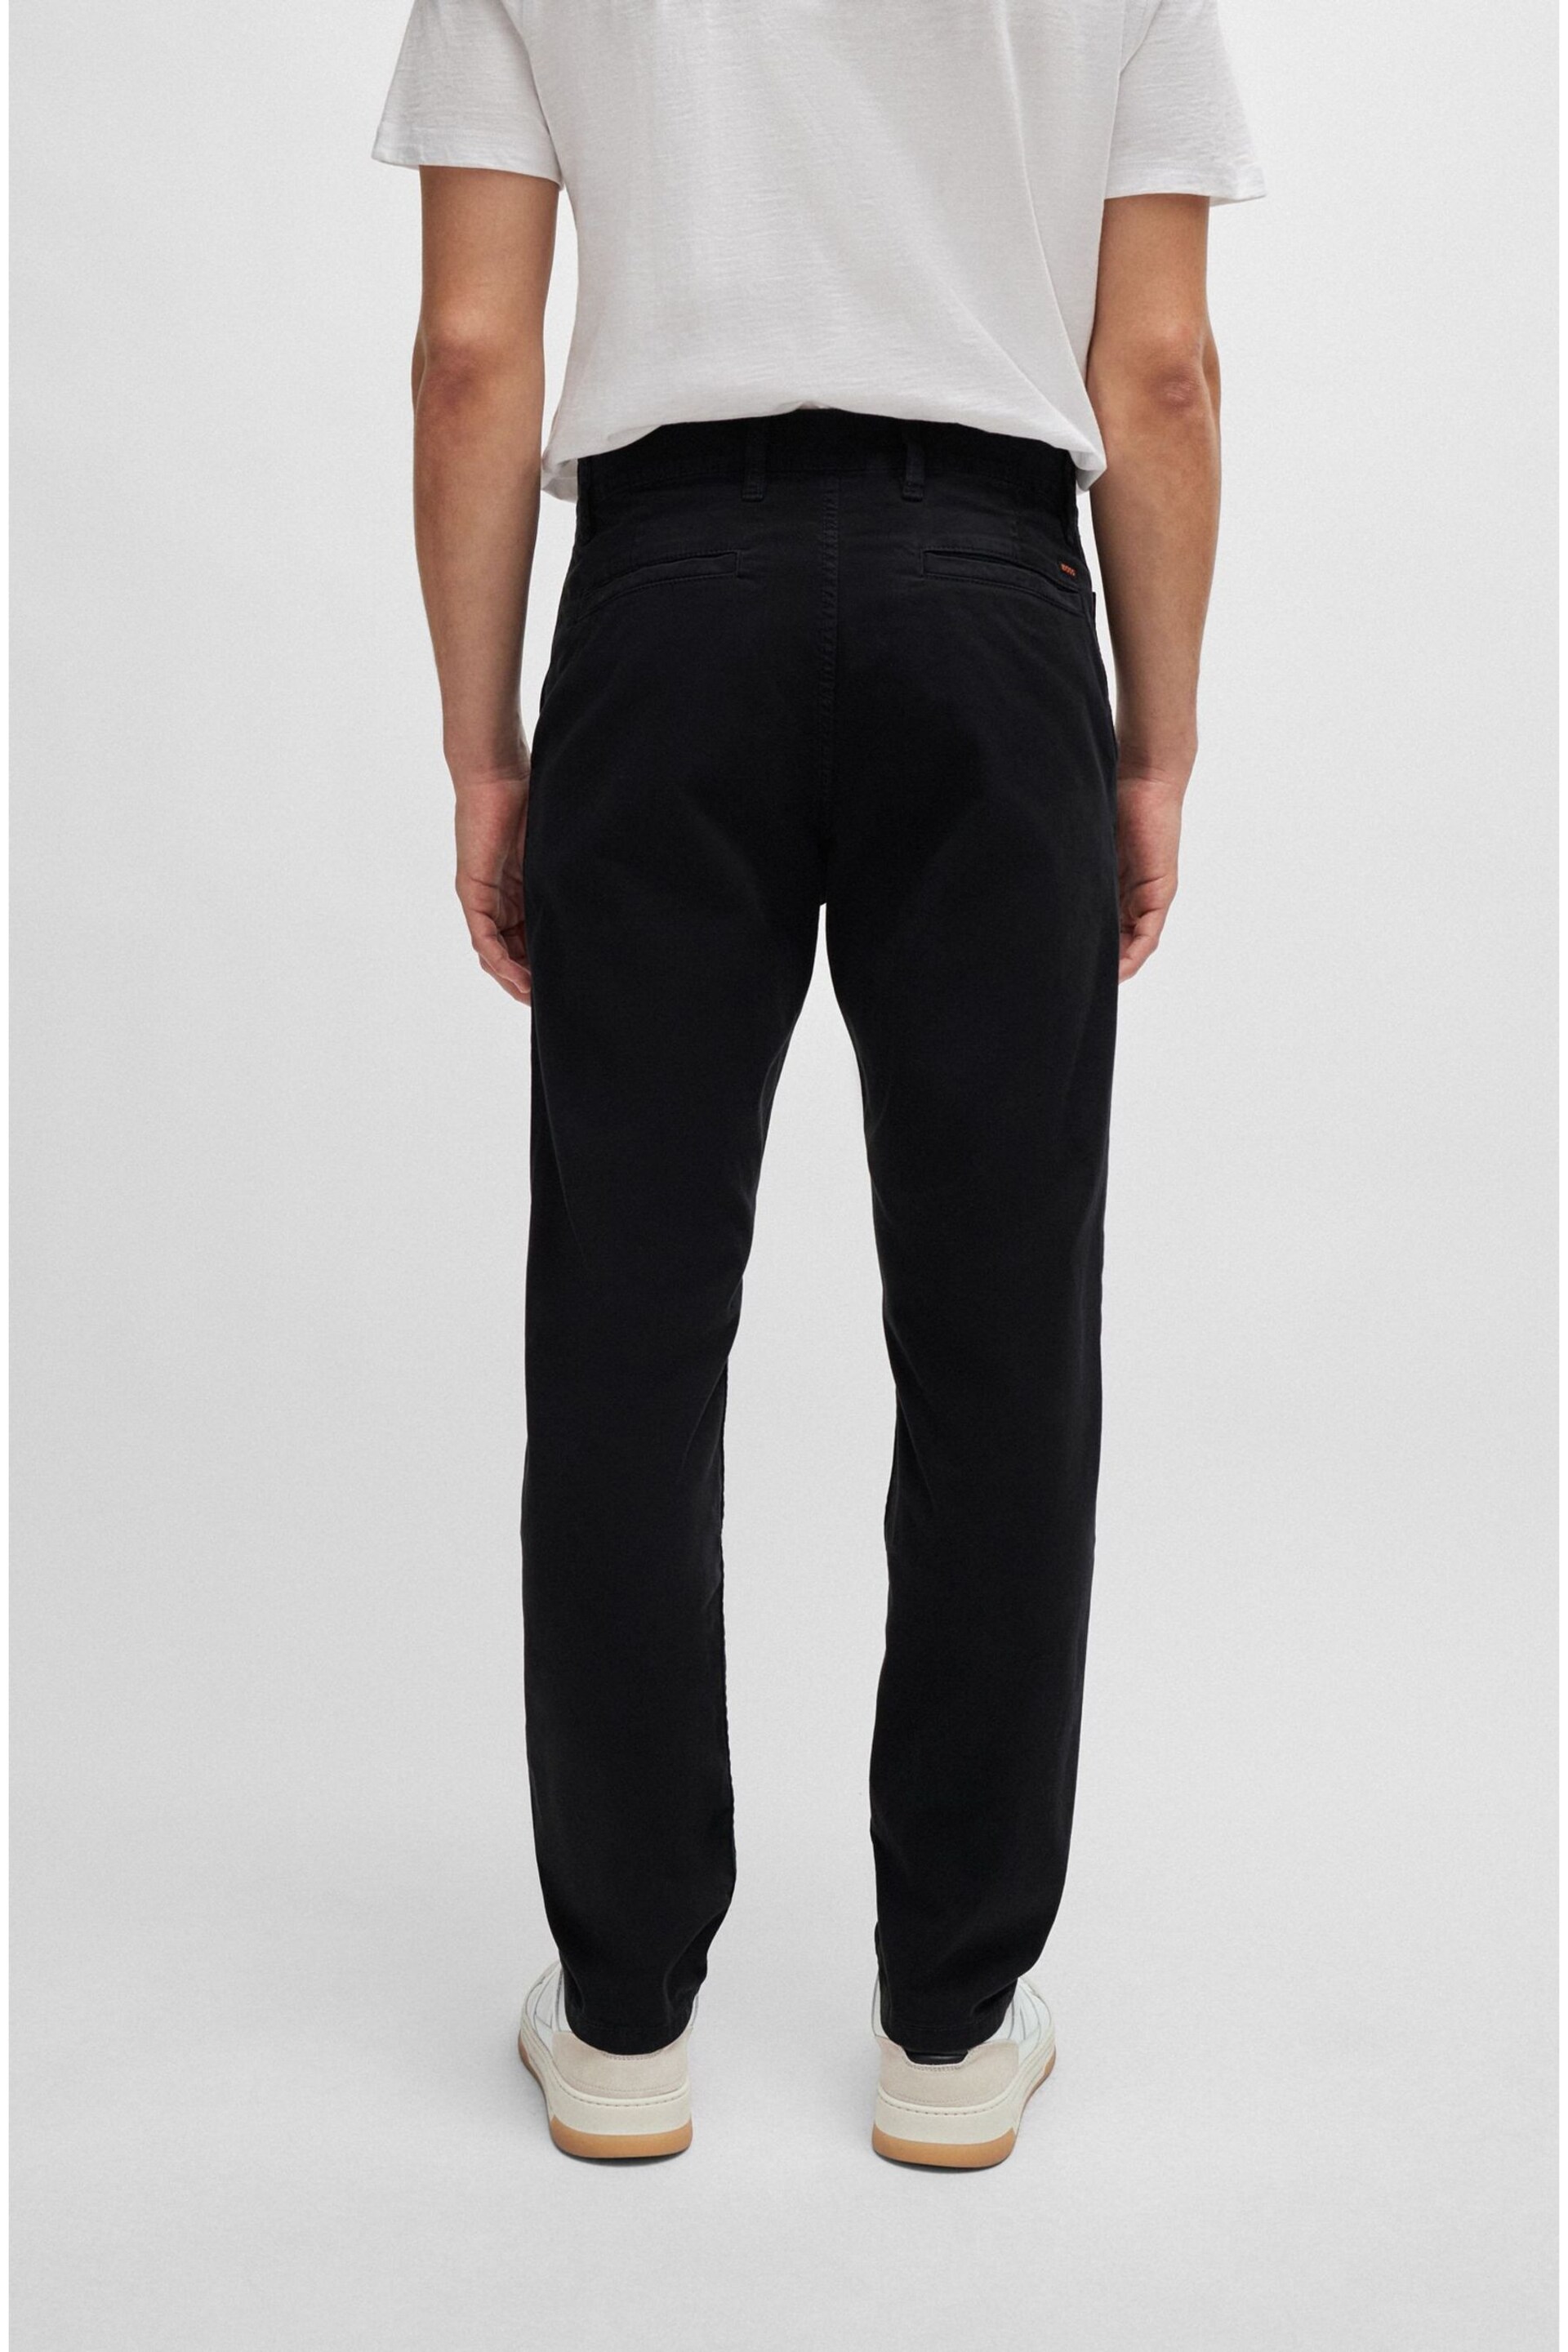 BOSS Black Tapered Fit Stretch Cotton Satin Chino Trousers - Image 2 of 4